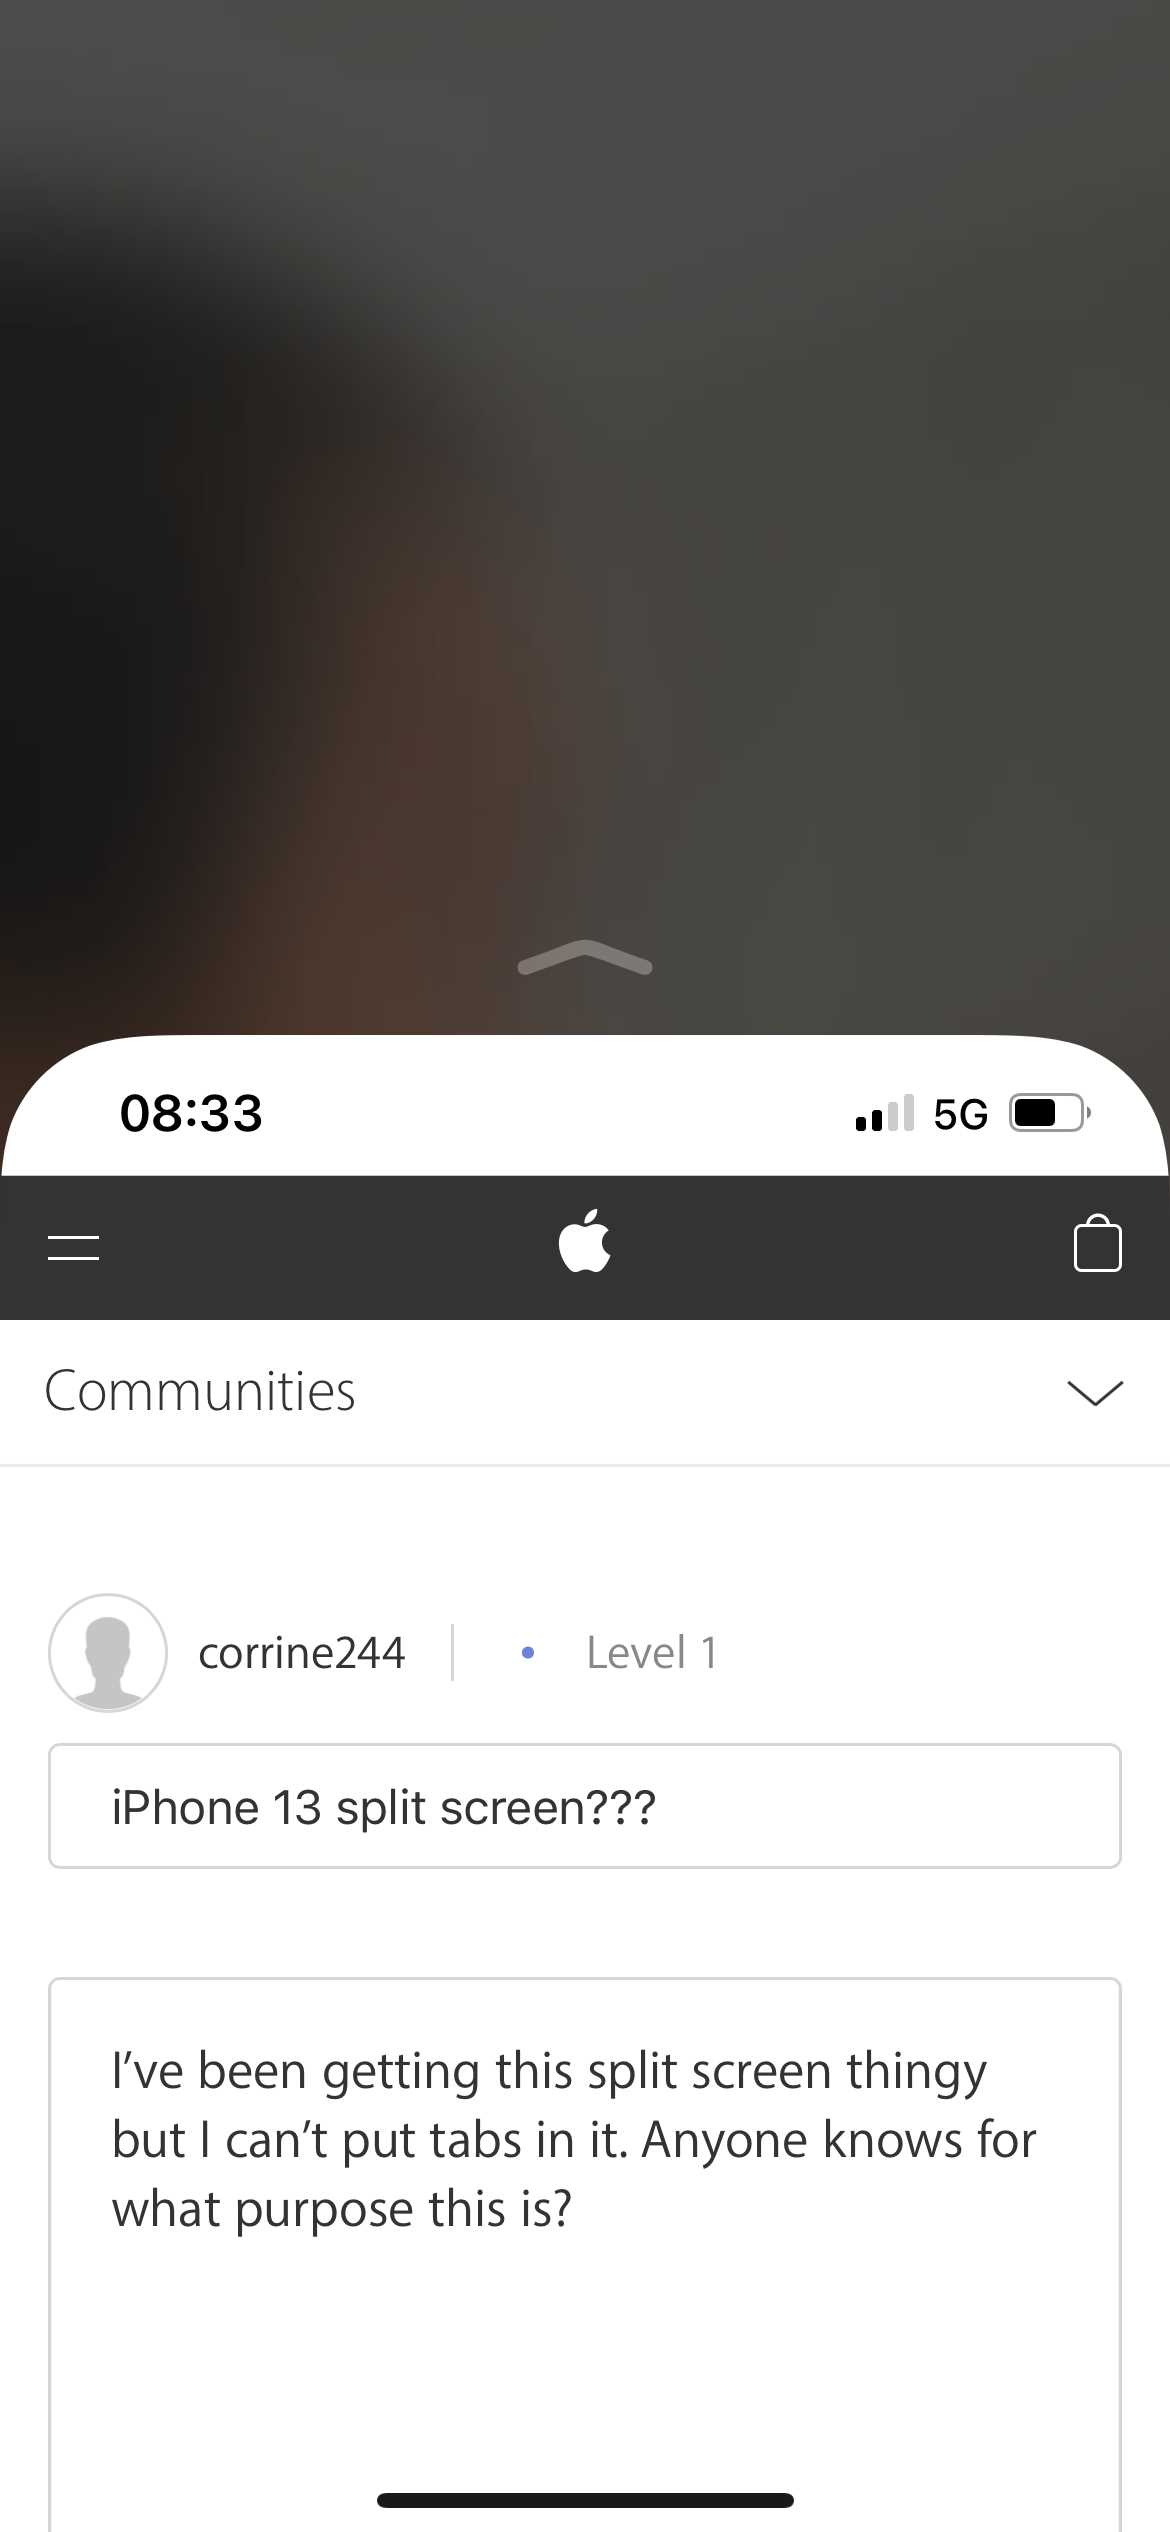 How to enable split screen on iPhone